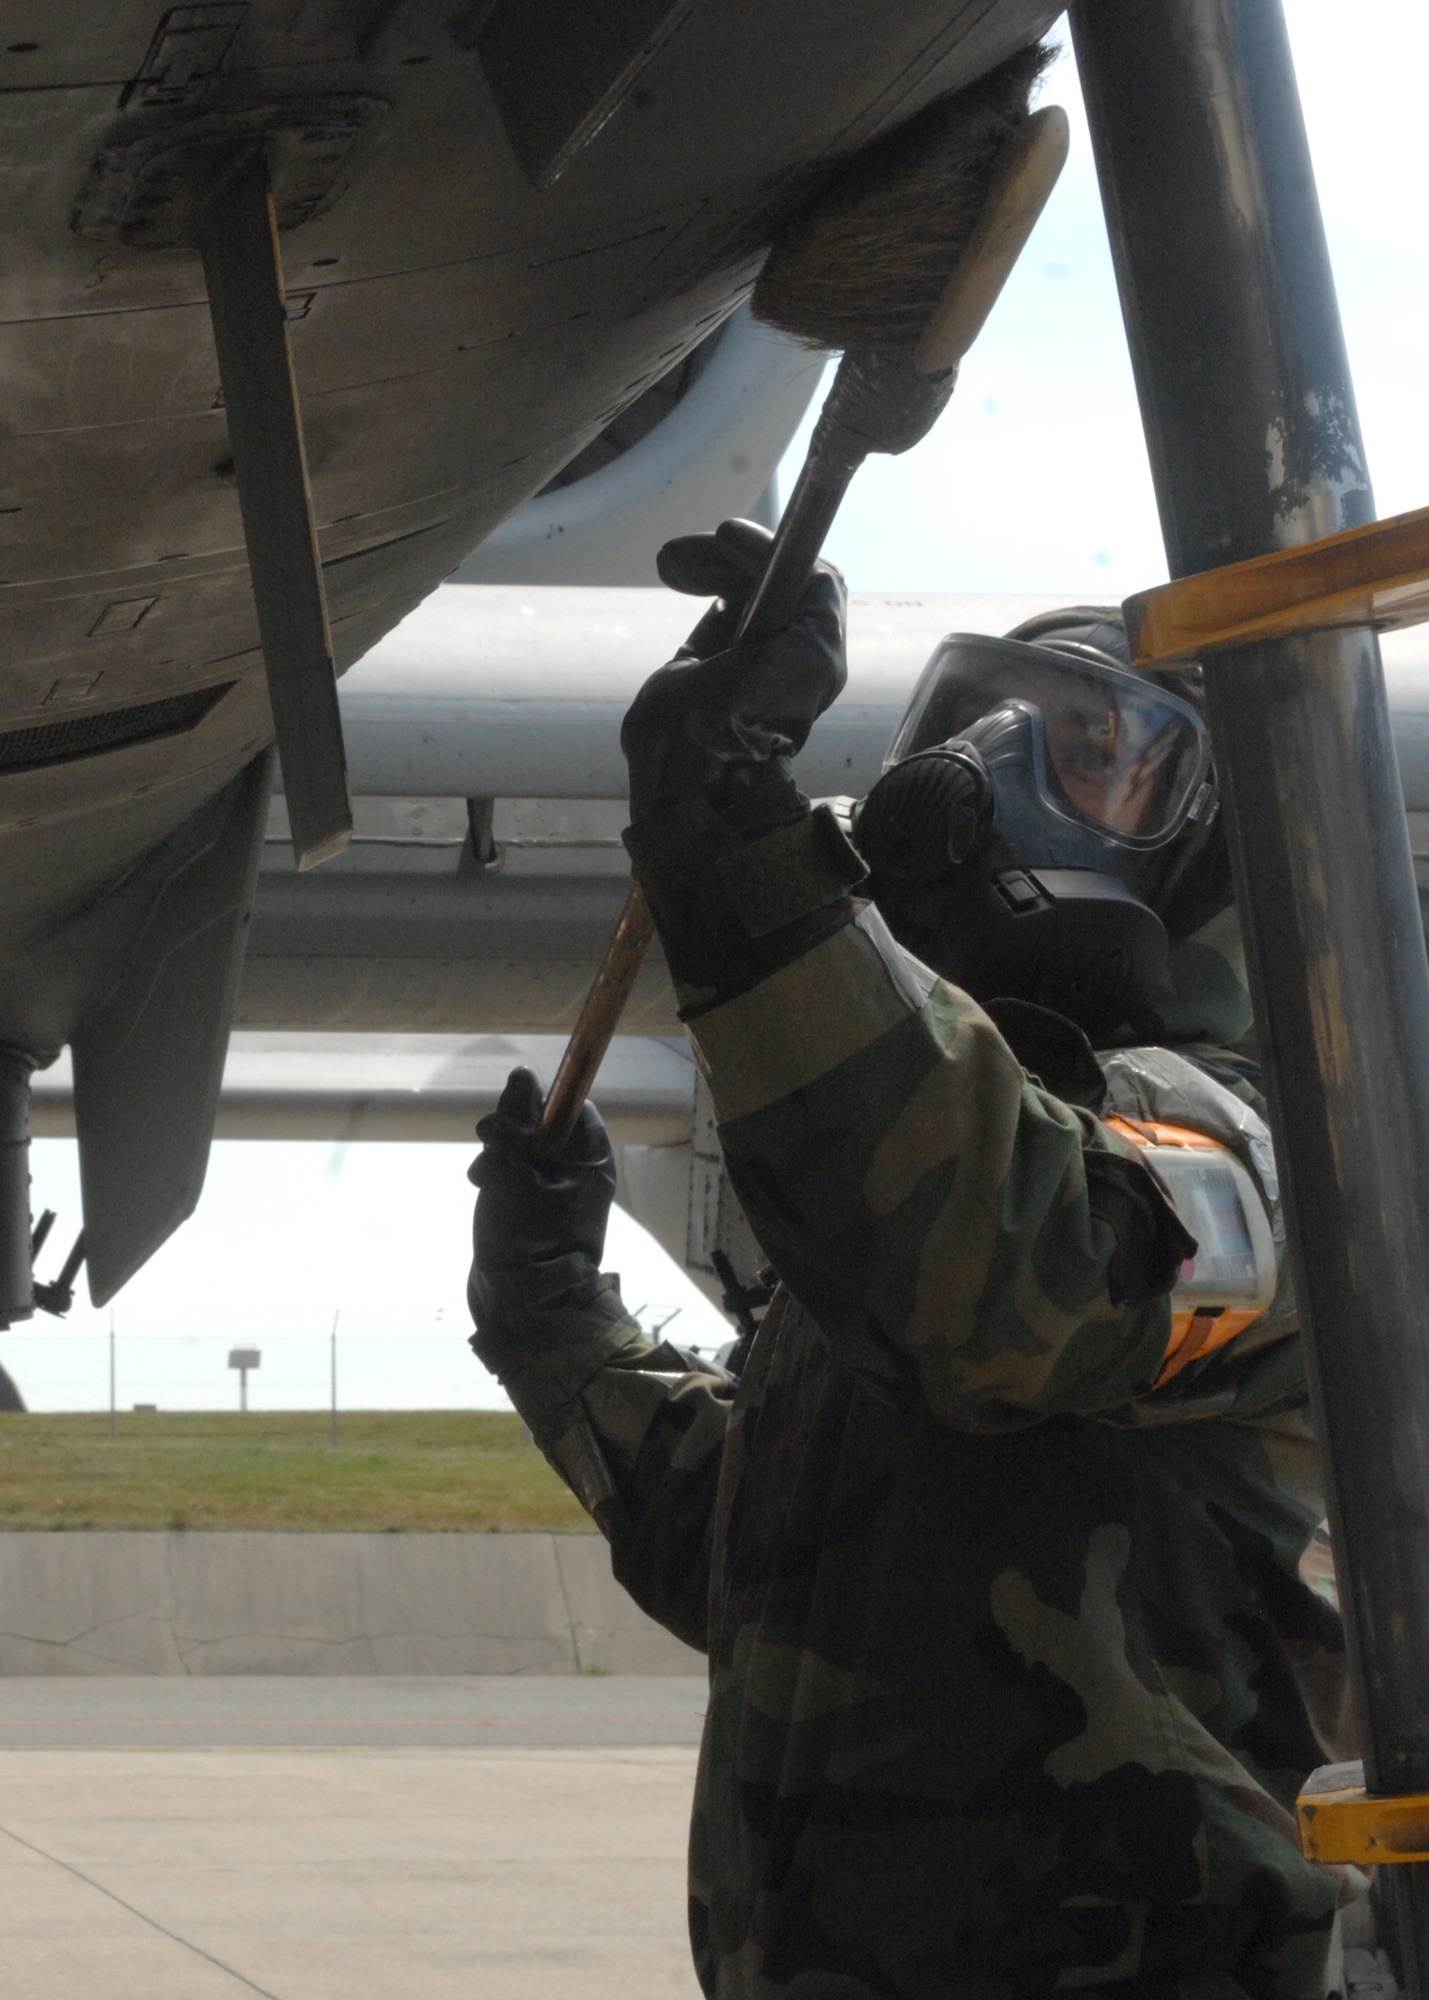 SPANGDAHLEM AIR BASE, Germany -- Senior Airman Bryan Craver, 52nd Aircraft Maintenance Squadron, decontaminates an A-10 Thunderbolt II outside hangars 1 and 2 Aug. 6 during the 52nd Fighter Wing’s Phase II exercise. Airmen were required to decontaminate the jet while in mission oriented protective posture 4 while being evaluated during an inject by the exercise evaluation team in preparation for the upcoming NATO Tactical Evaluation in June 2010. (U.S. Air Force photo/Senior Airman Jenifer H. Calhoun)